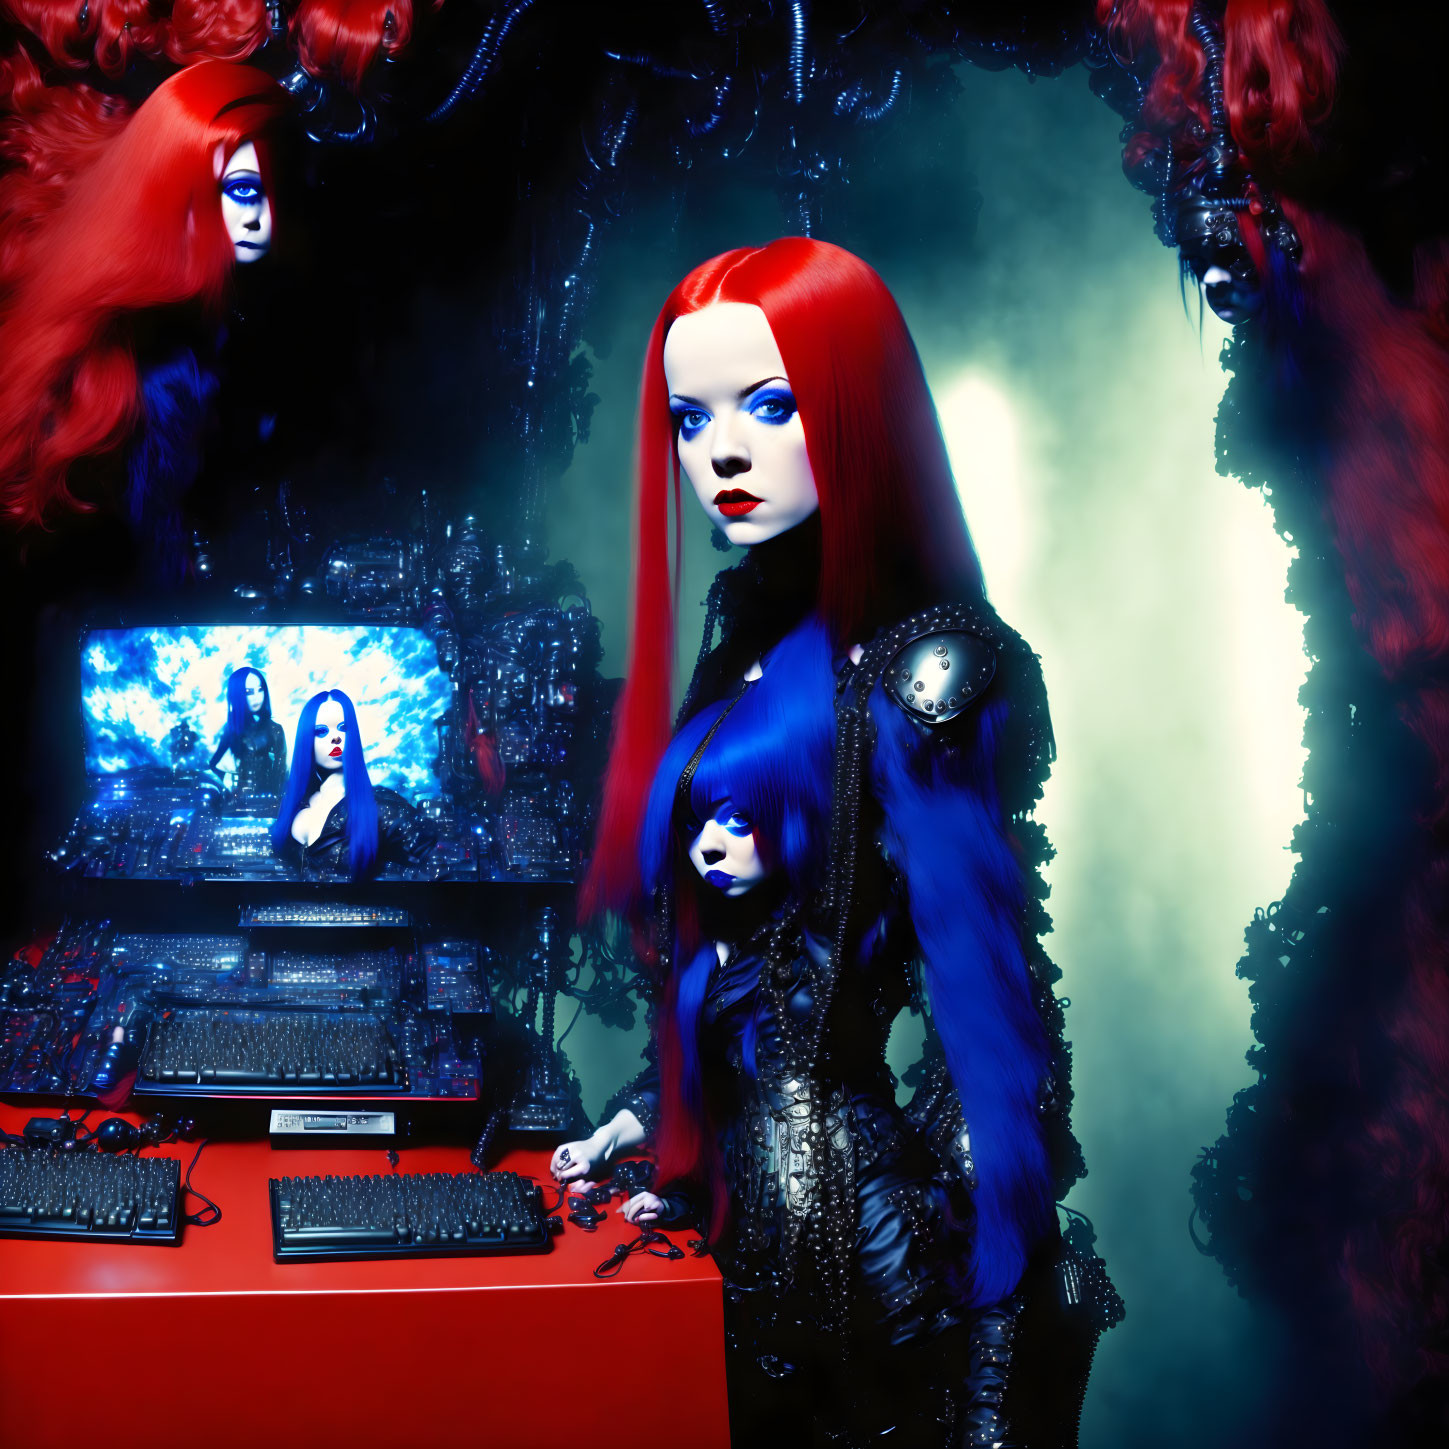 Vivid Cyber-Themed Artwork with Red and Blue Female Characters